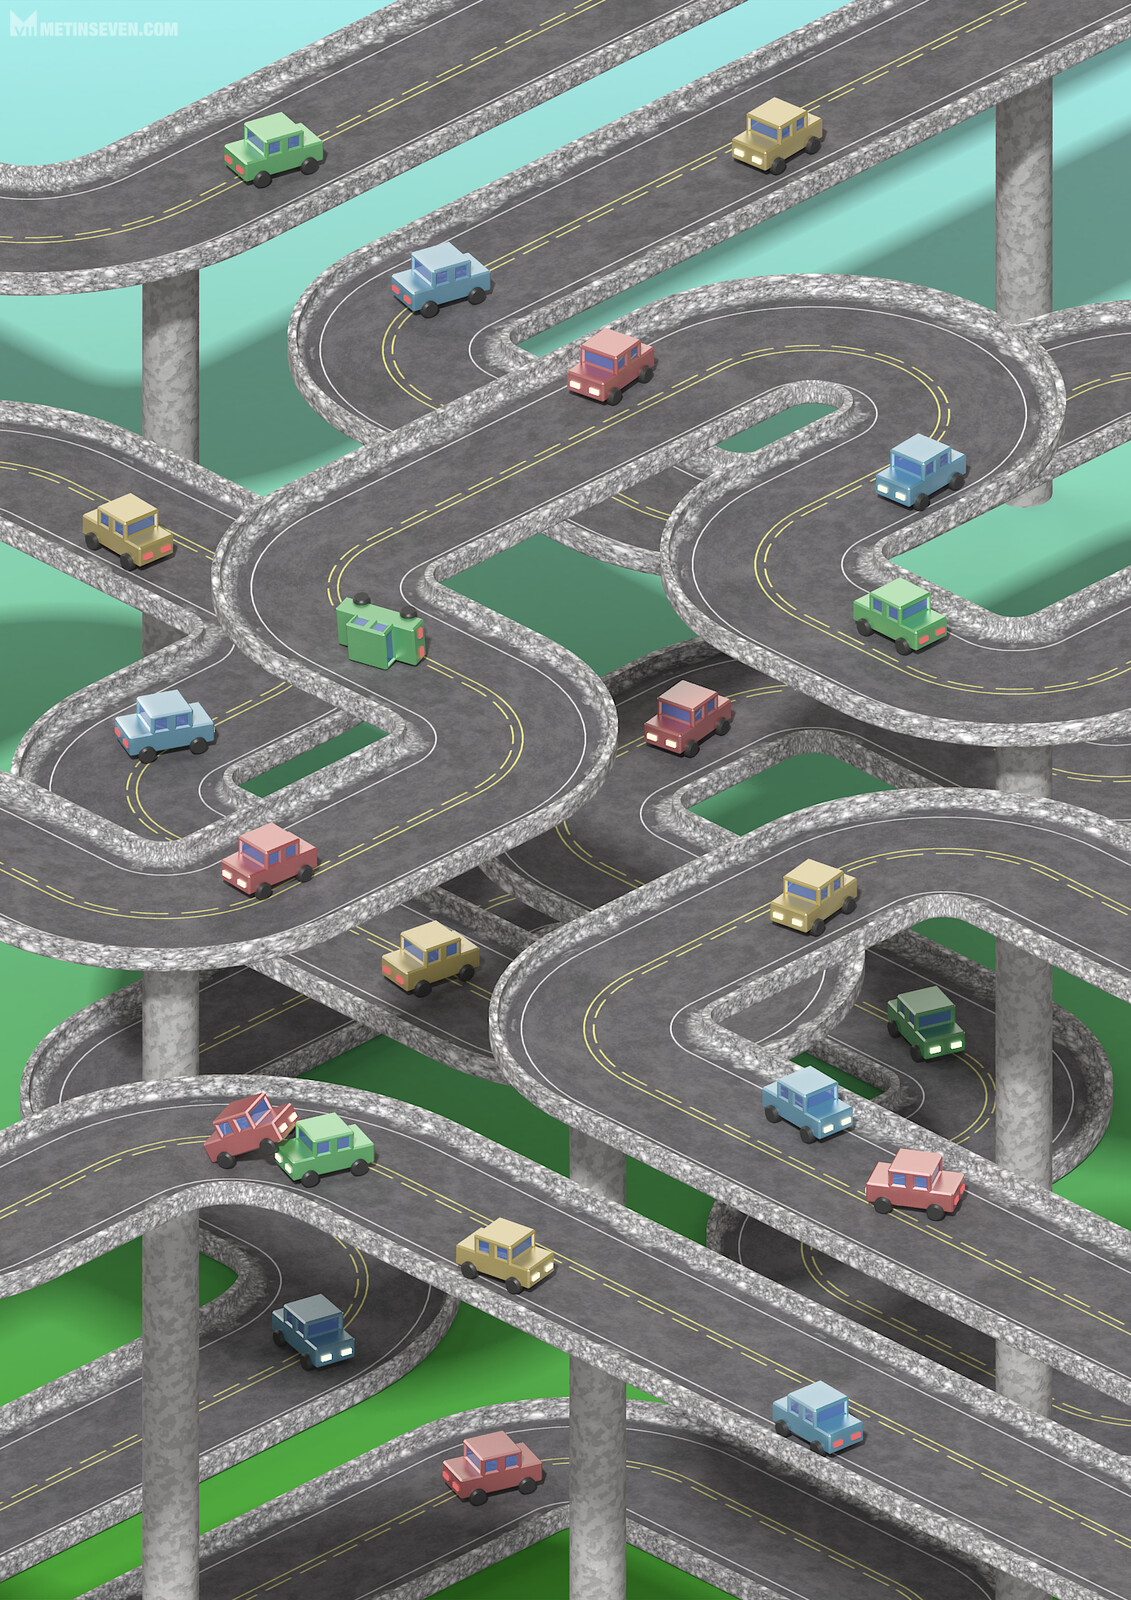 Magazine cover illustration about car navigation systems